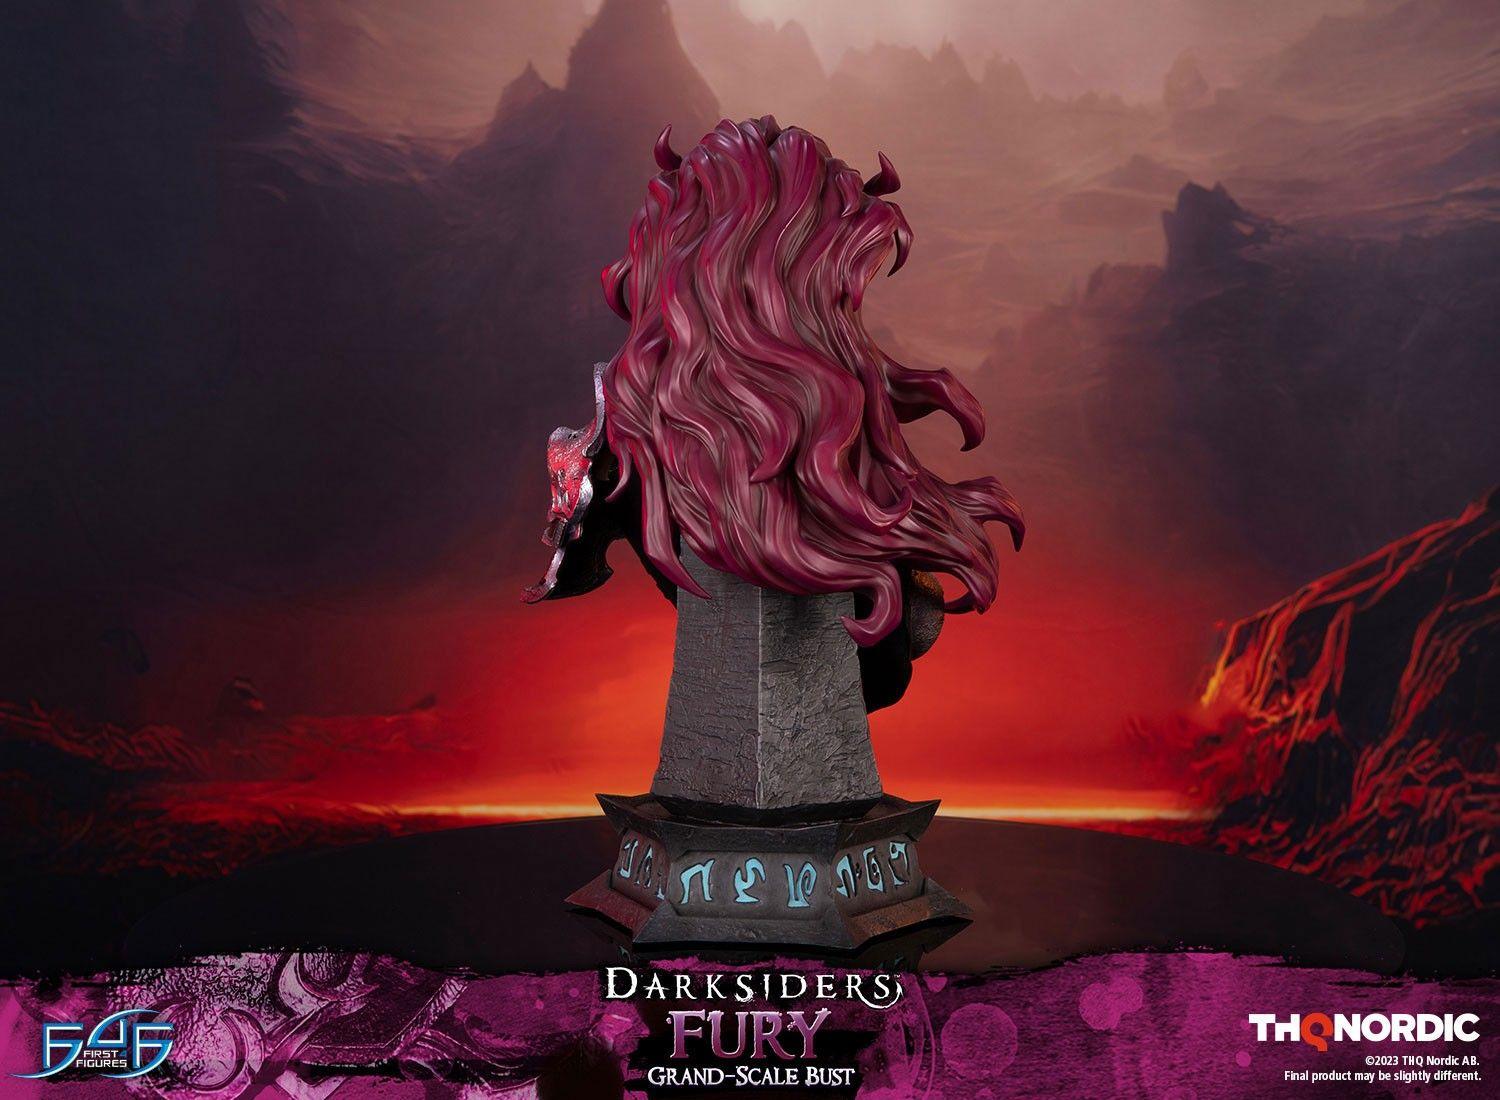 Darksiders - Fury Grand Scale Bust Bust by First 4 Figures | Titan Pop Culture